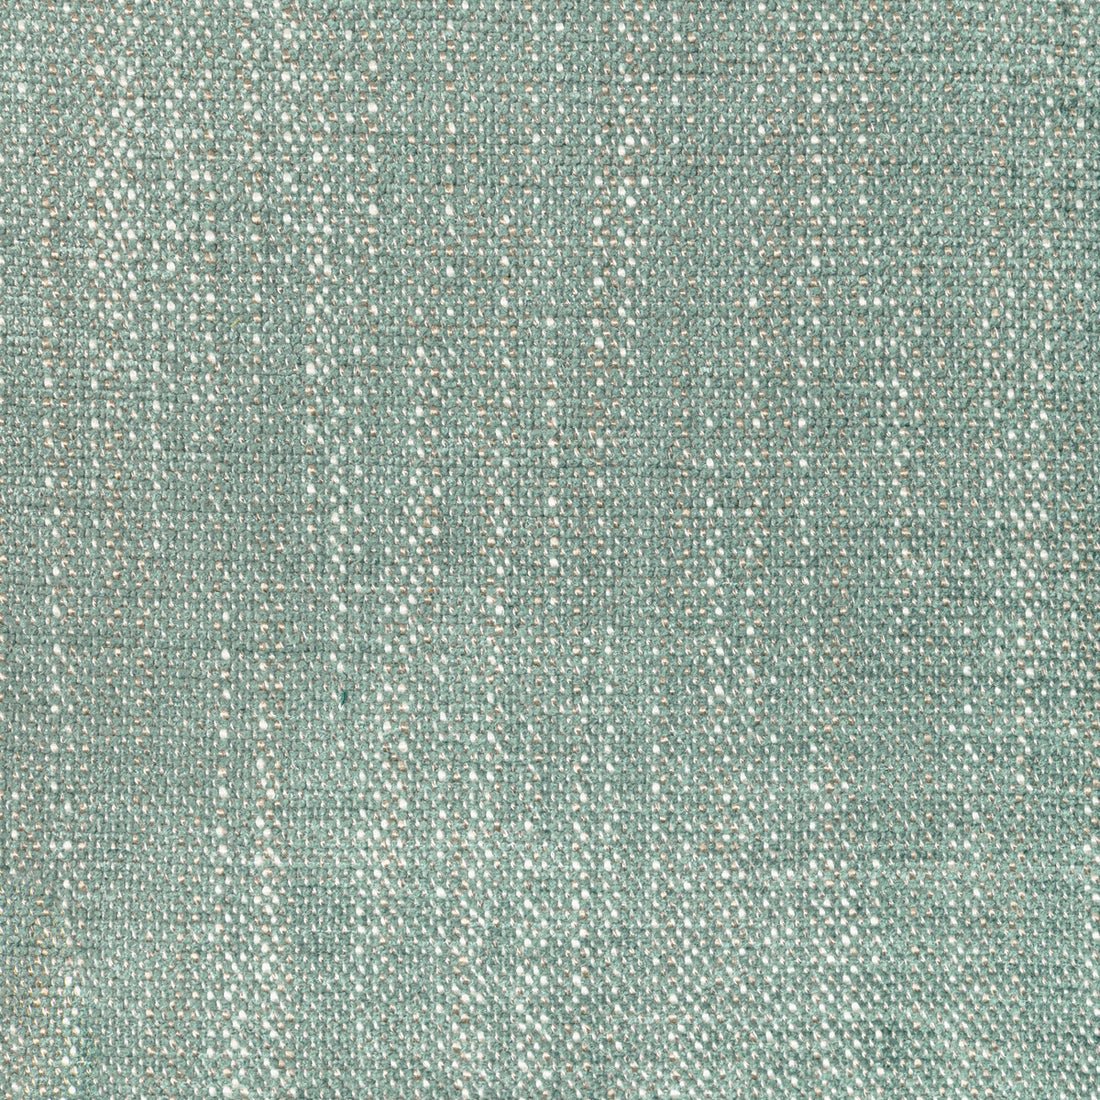 Kravet Design fabric in 36408-1635 color - pattern 36408.1635.0 - by Kravet Design in the Performance Crypton Home collection